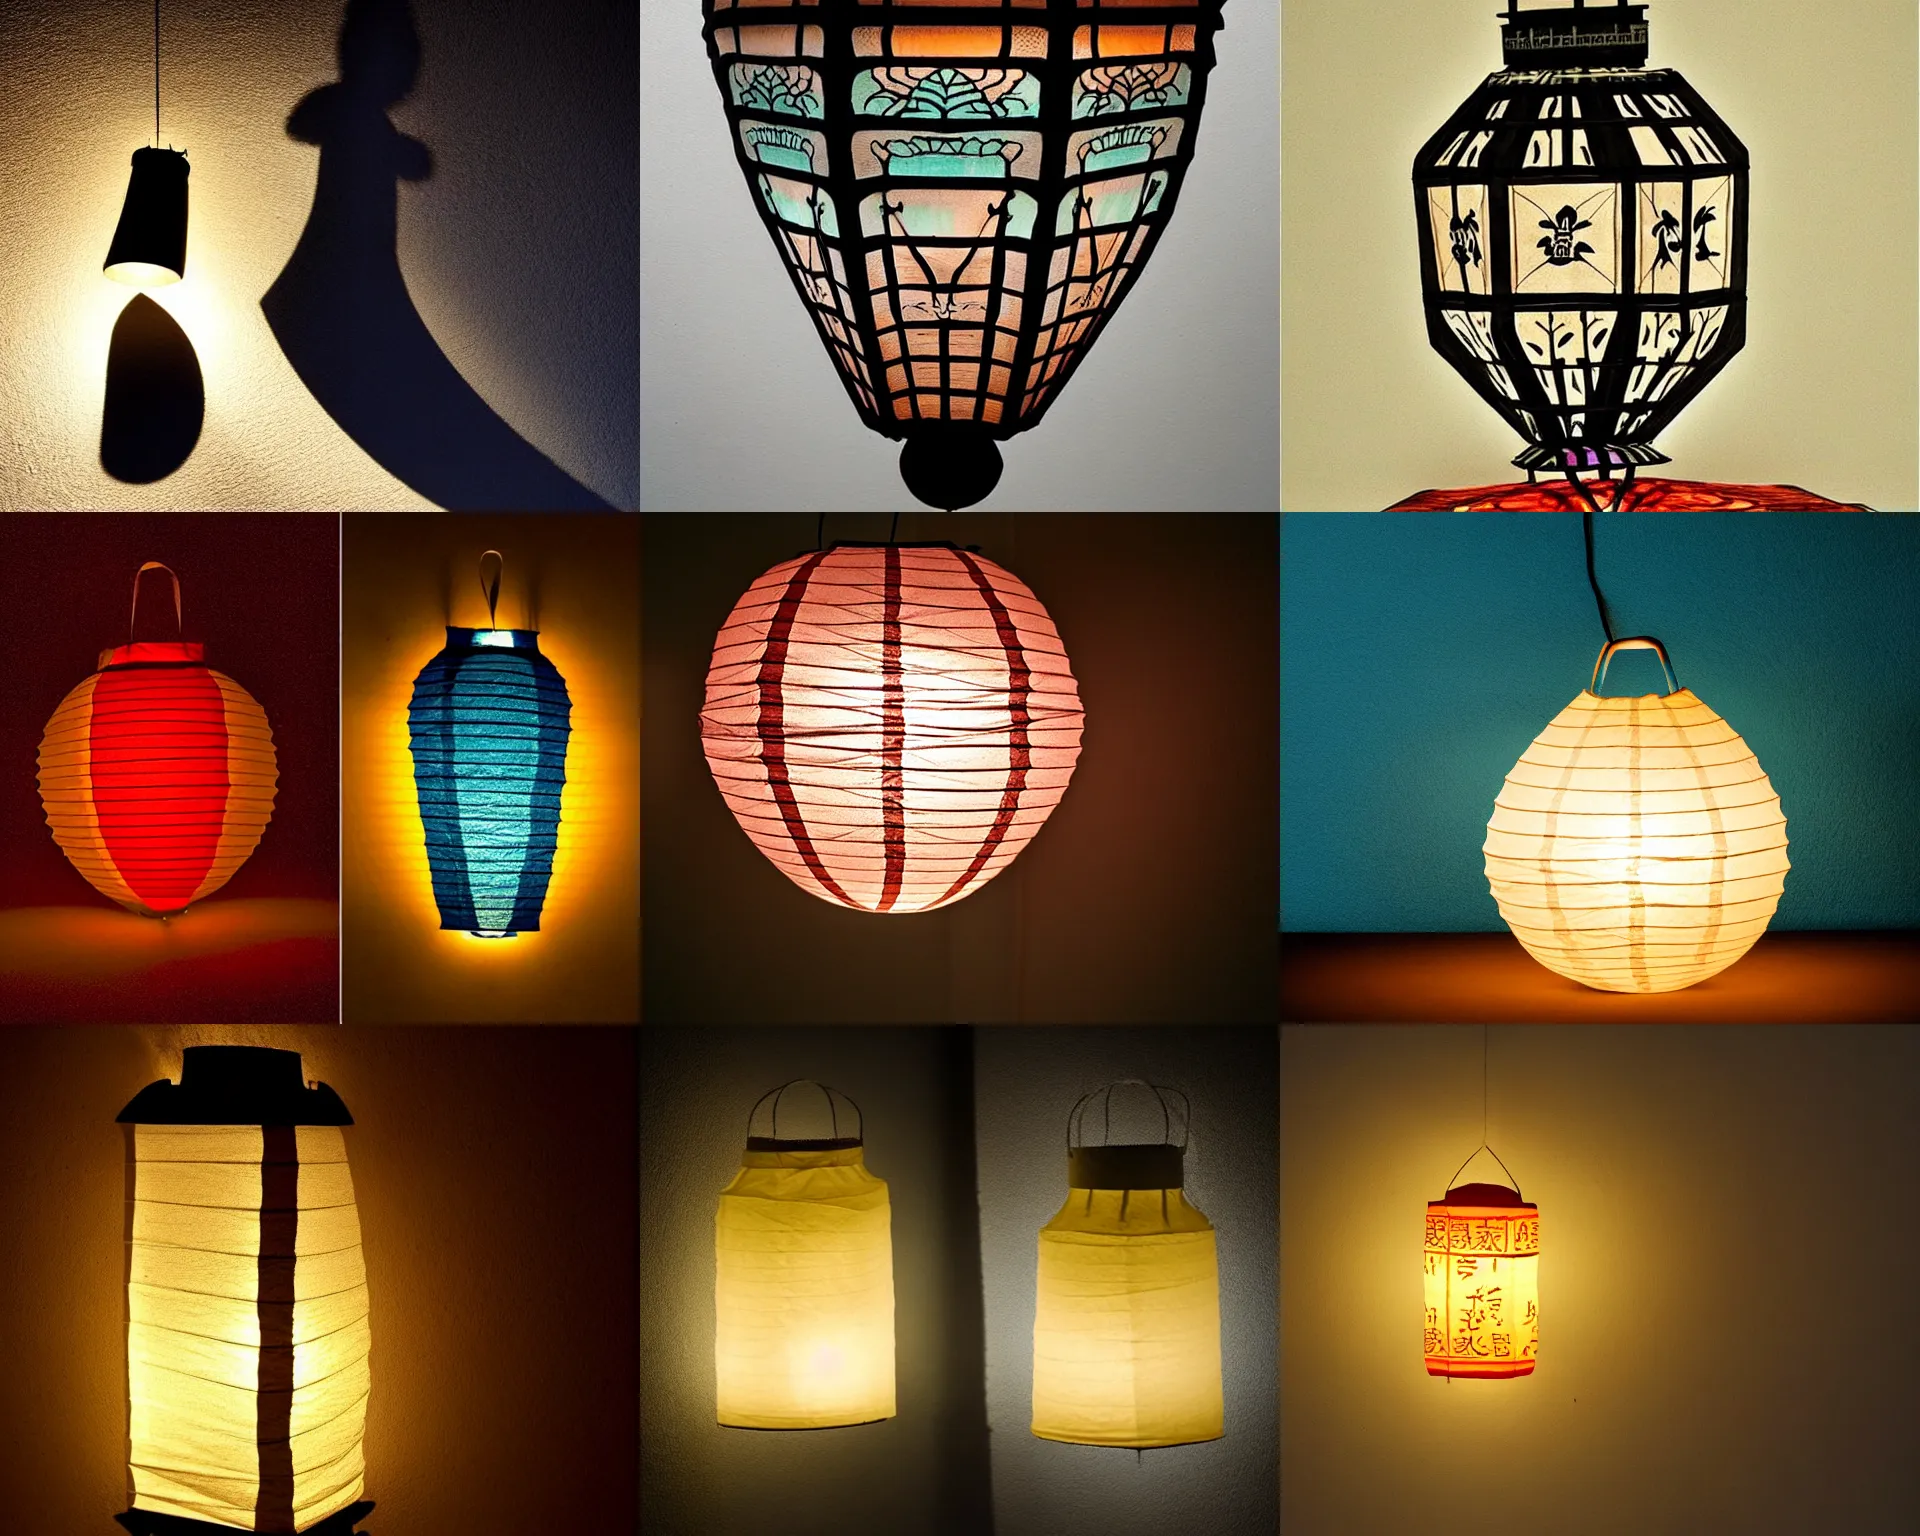 Prompt: a paper lantern illuminated by the ancient art of color and shadow, the shadow is the artist's true identity. the images of these bell - like ornaments are so subversive and empowering.